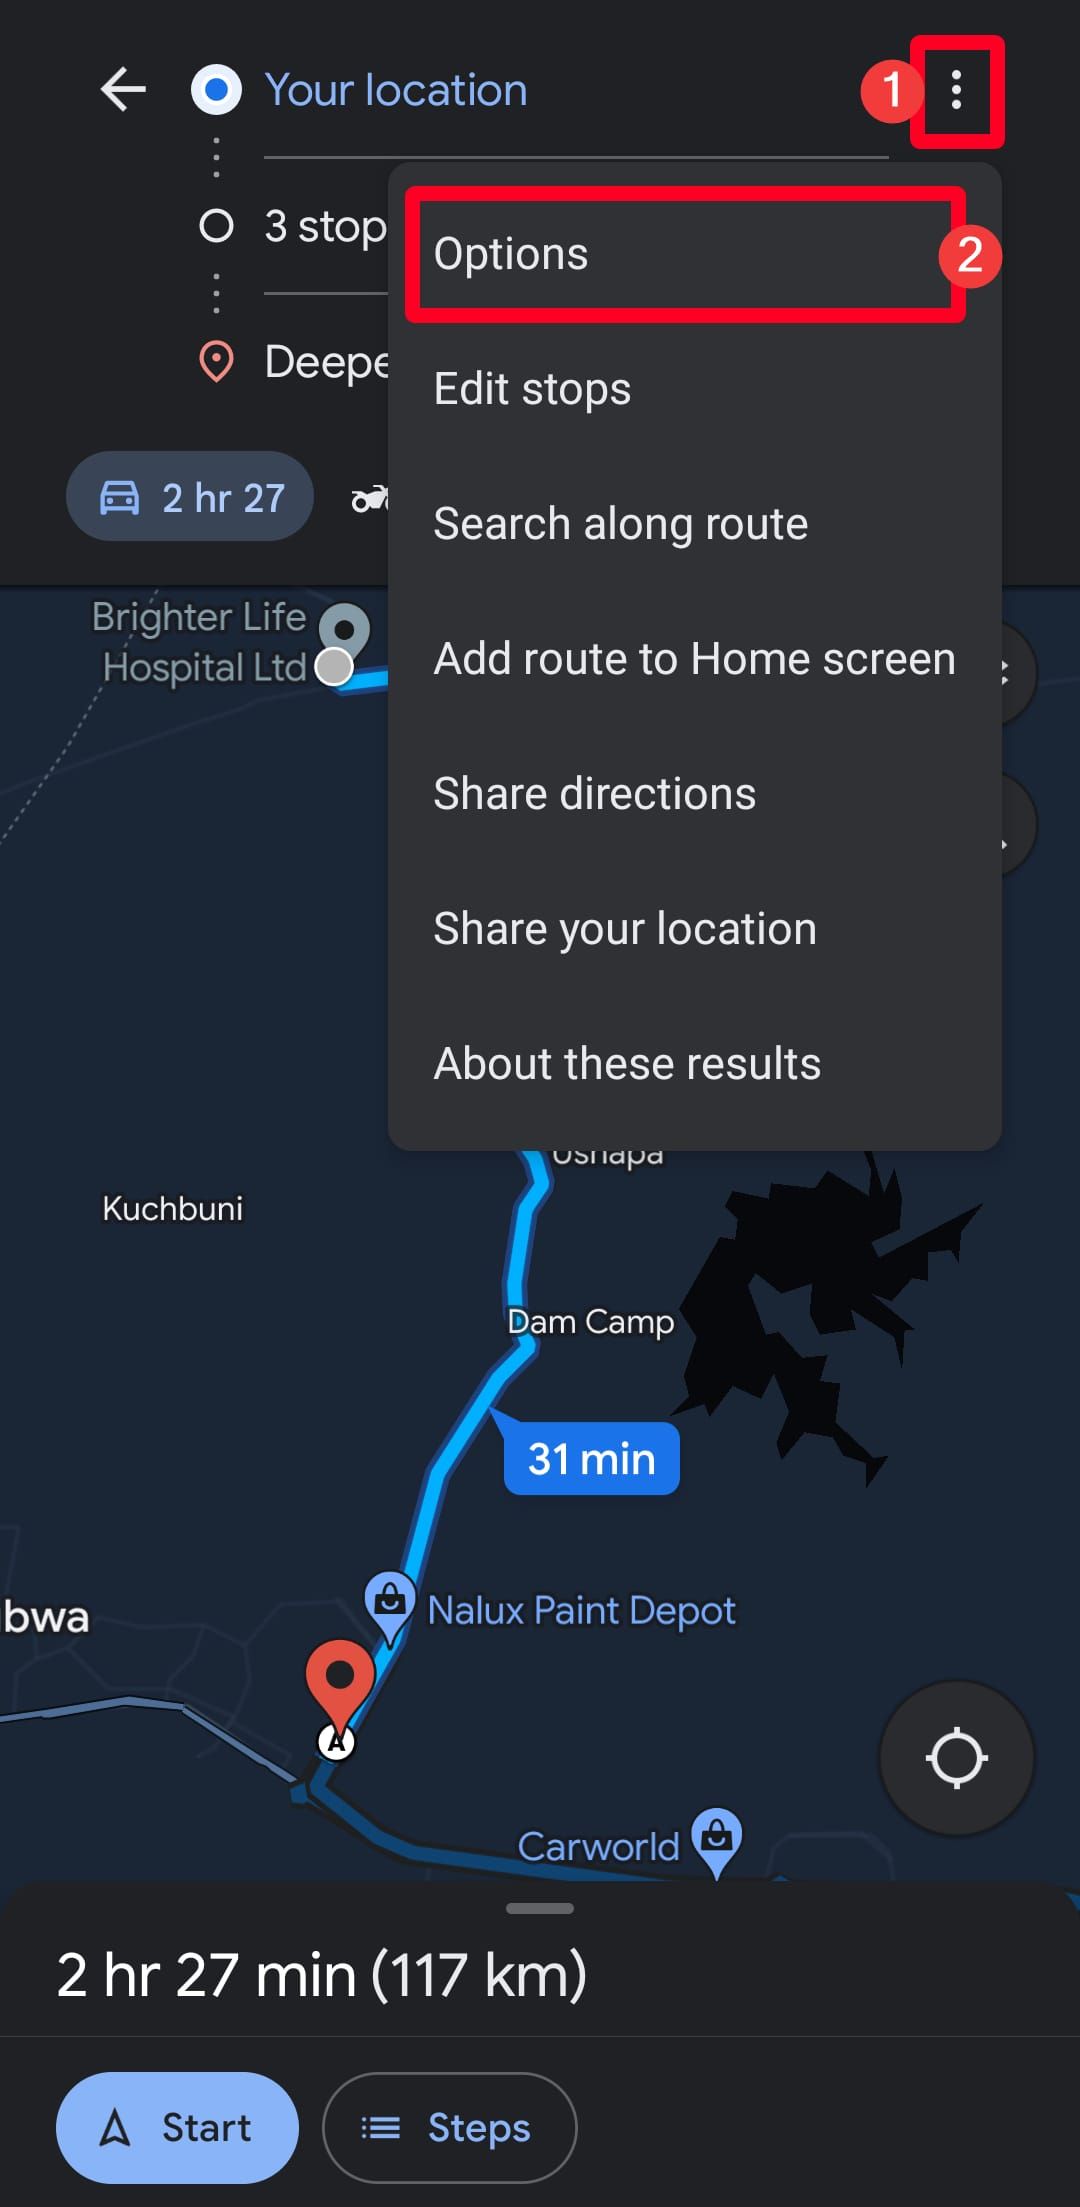 Route options in Google Maps mobile app